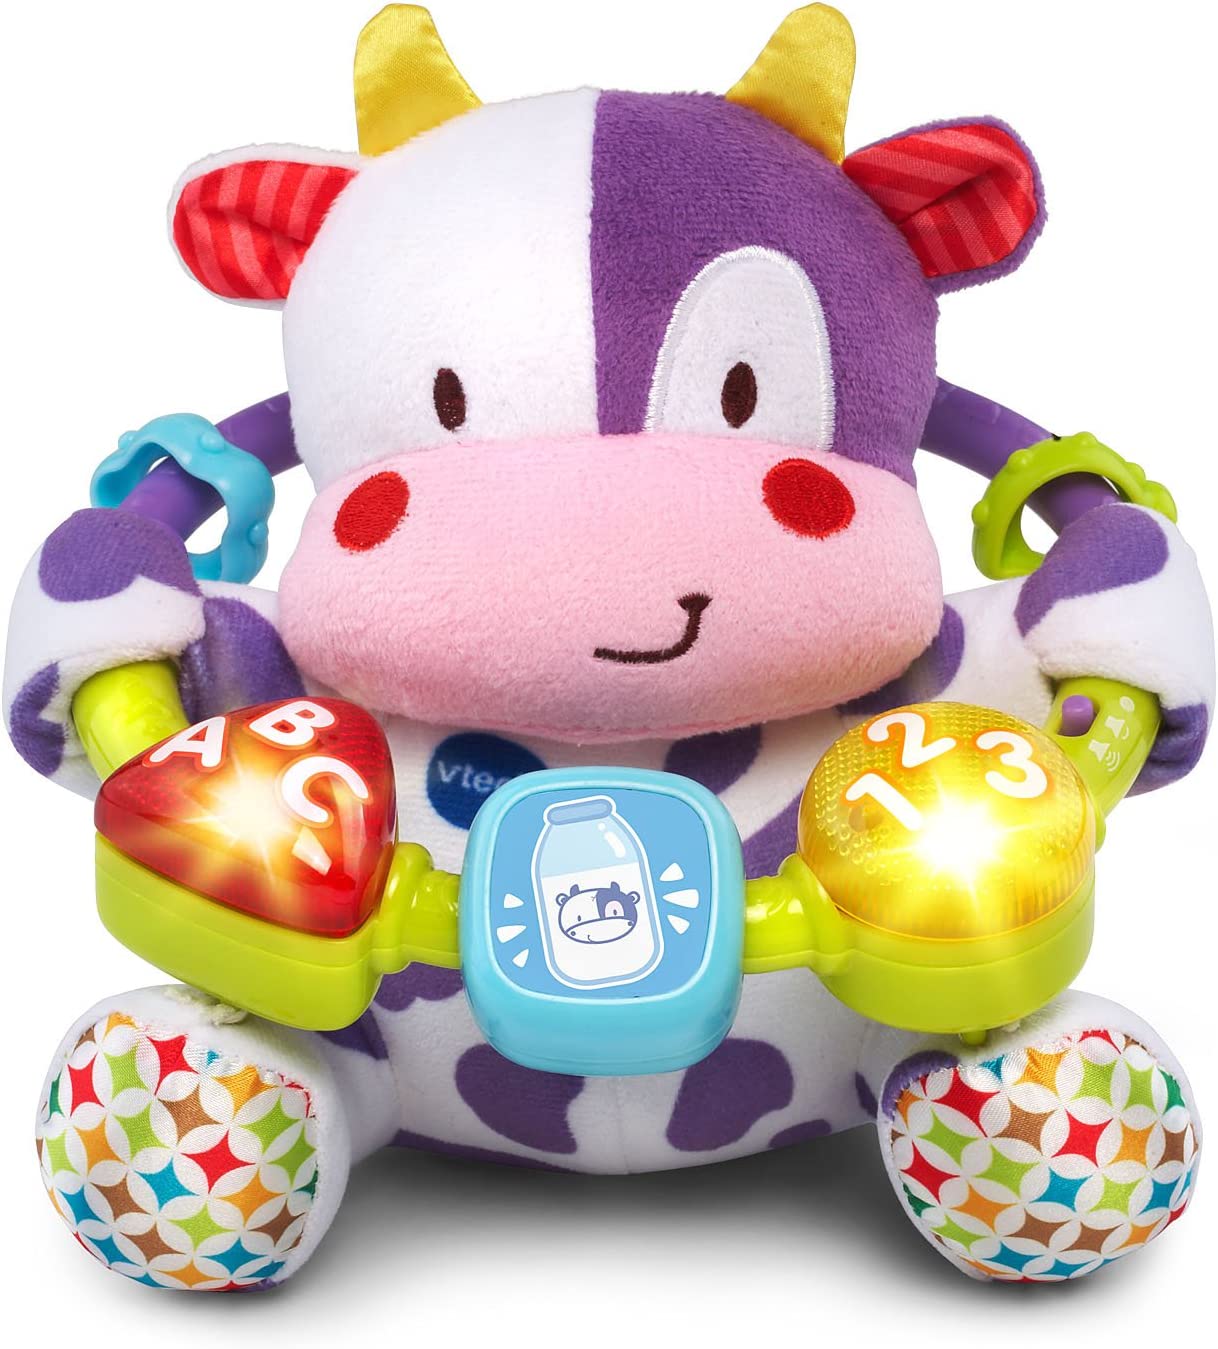 VTech Lil' Critters Moosical Beads, Purple - for Ages 0-24 Months